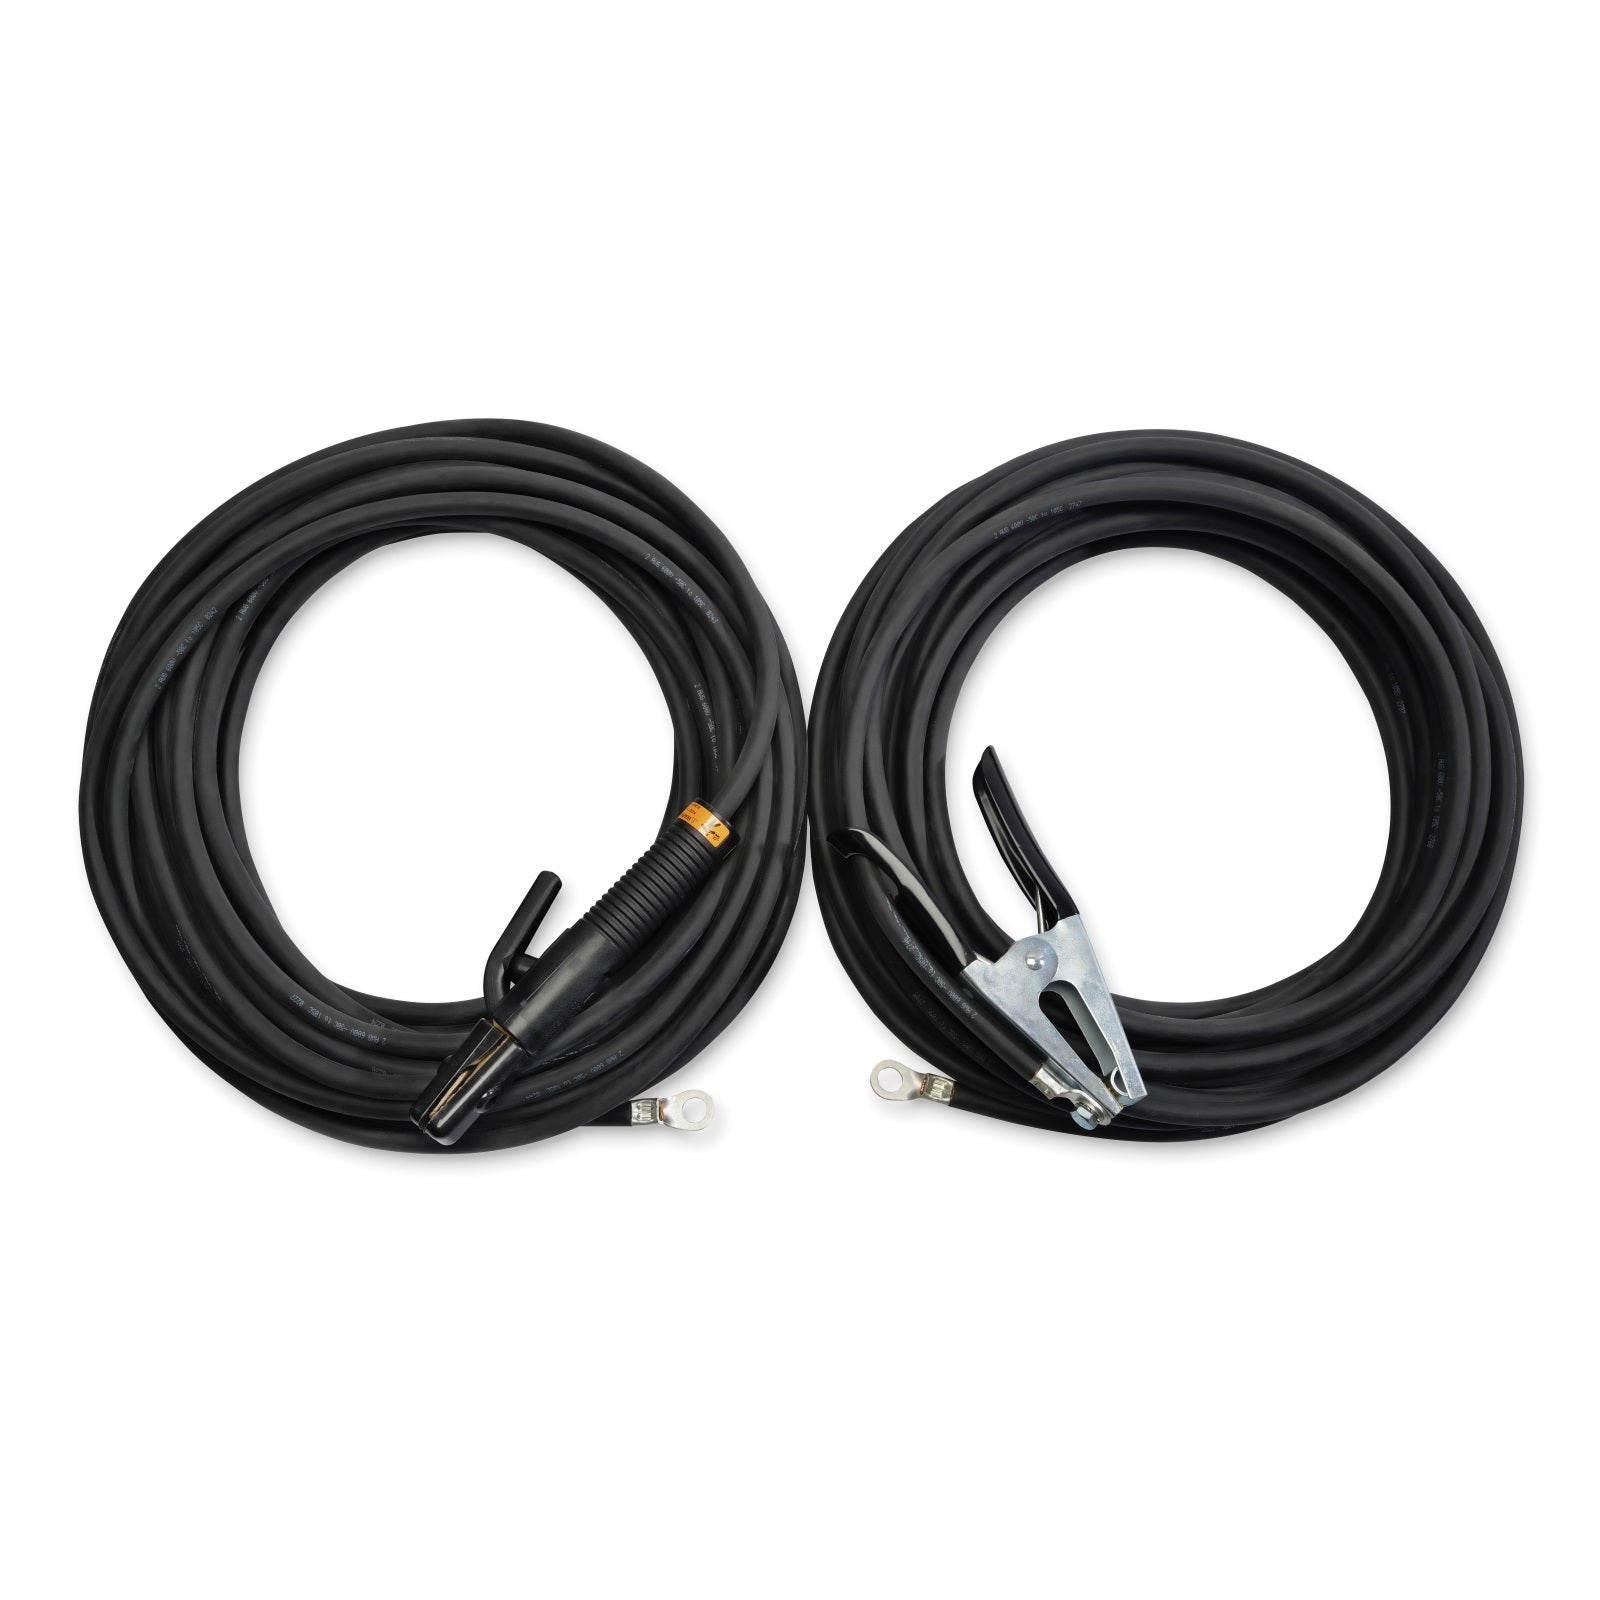 Miller 50' Leads  No. 2 Stick Cable Set (300836)